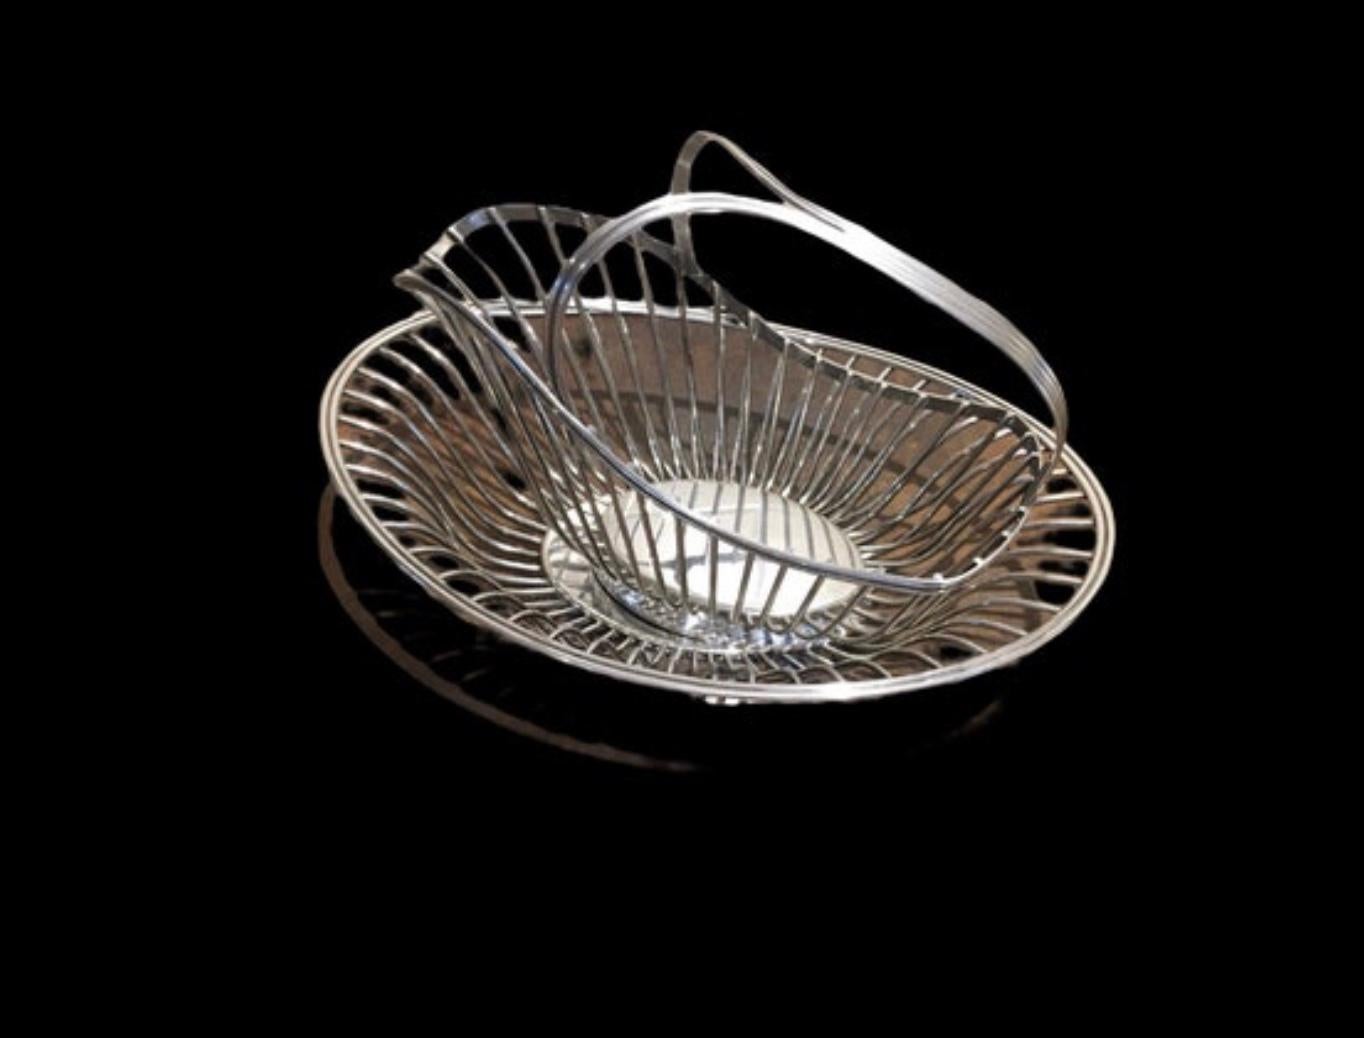 Vintage silver plate bread basket and wine holder by Galia Christofle 
Made in France 
Both pieces are stamped with the makers mark
In very good condition 
Approx dimensions of the bread basket 30.5 cm long x21 cm wide
Wine bottle holder 11 cm wide